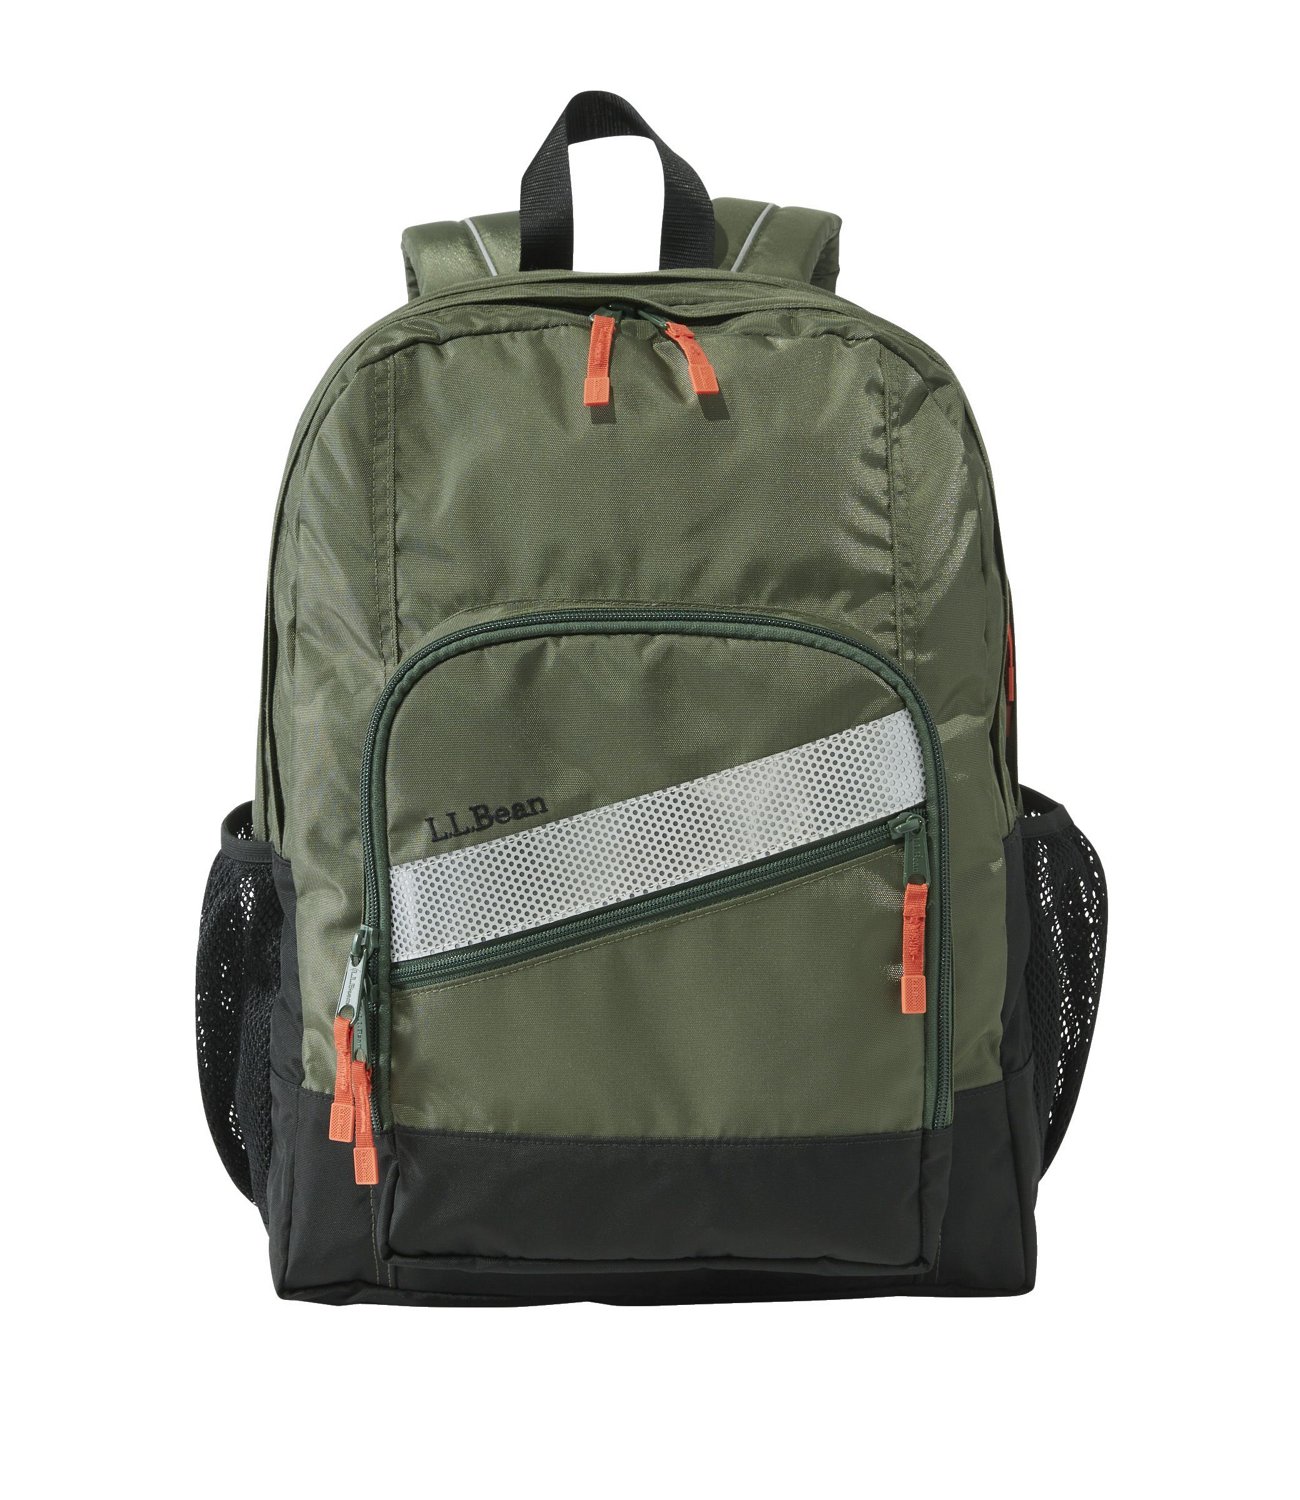 https://academy.scene7.com/is/image/academy//bags---backpacks/llbean-deluxe-backpack-137988-green/og-image/84ccac9f77714af4920c4ce795a831c4